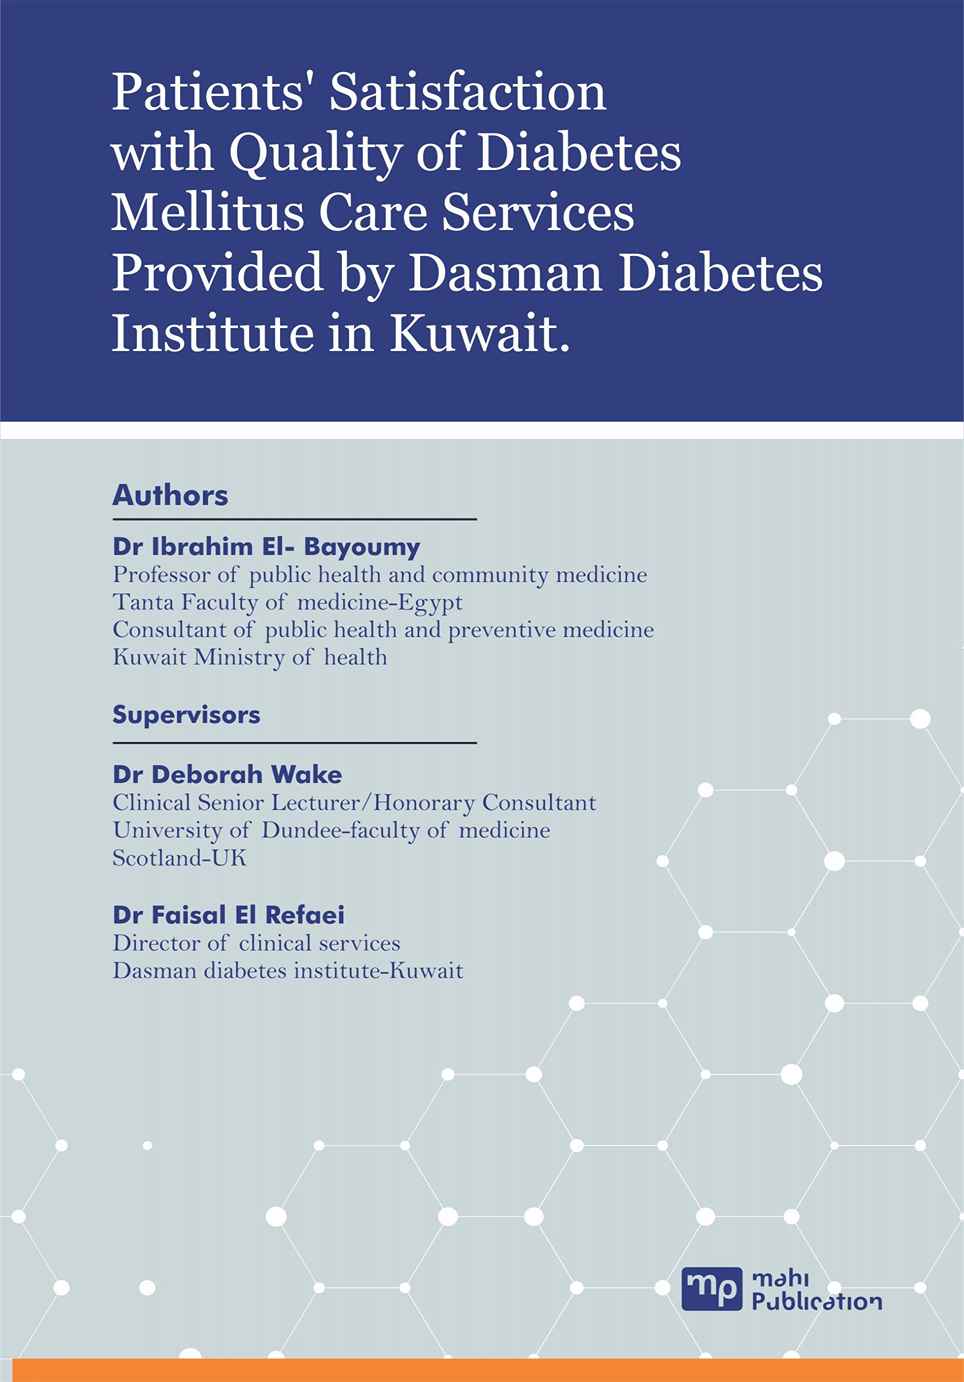 Patients' Satisfaction with Quality of Diabetes Mellitus Care Services Provided by Dasman Diabetes Institute in Kuwait